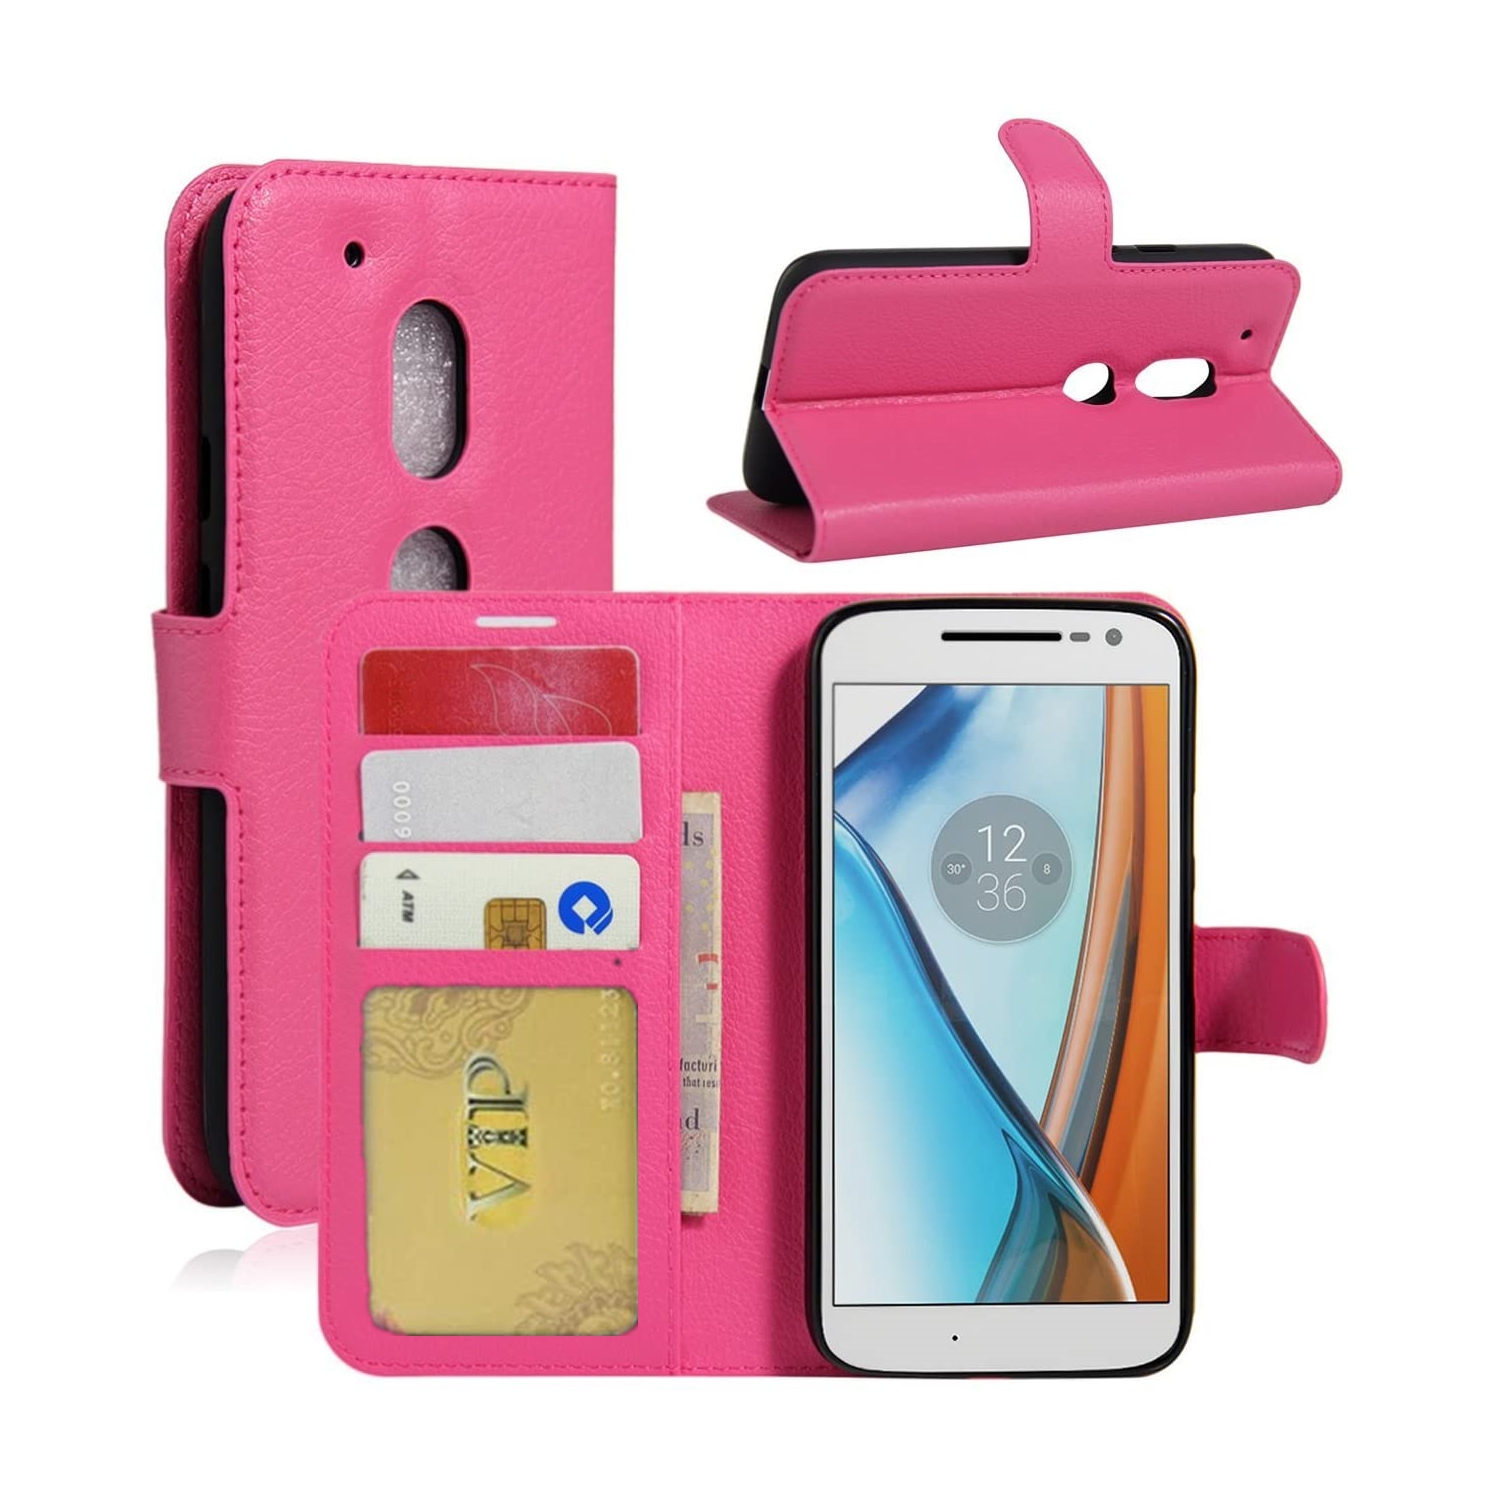 [CS] Motorola Moto G6 Play Case, Magnetic Leather Folio Wallet Flip Case Cover with Card Slot, Hot Pink